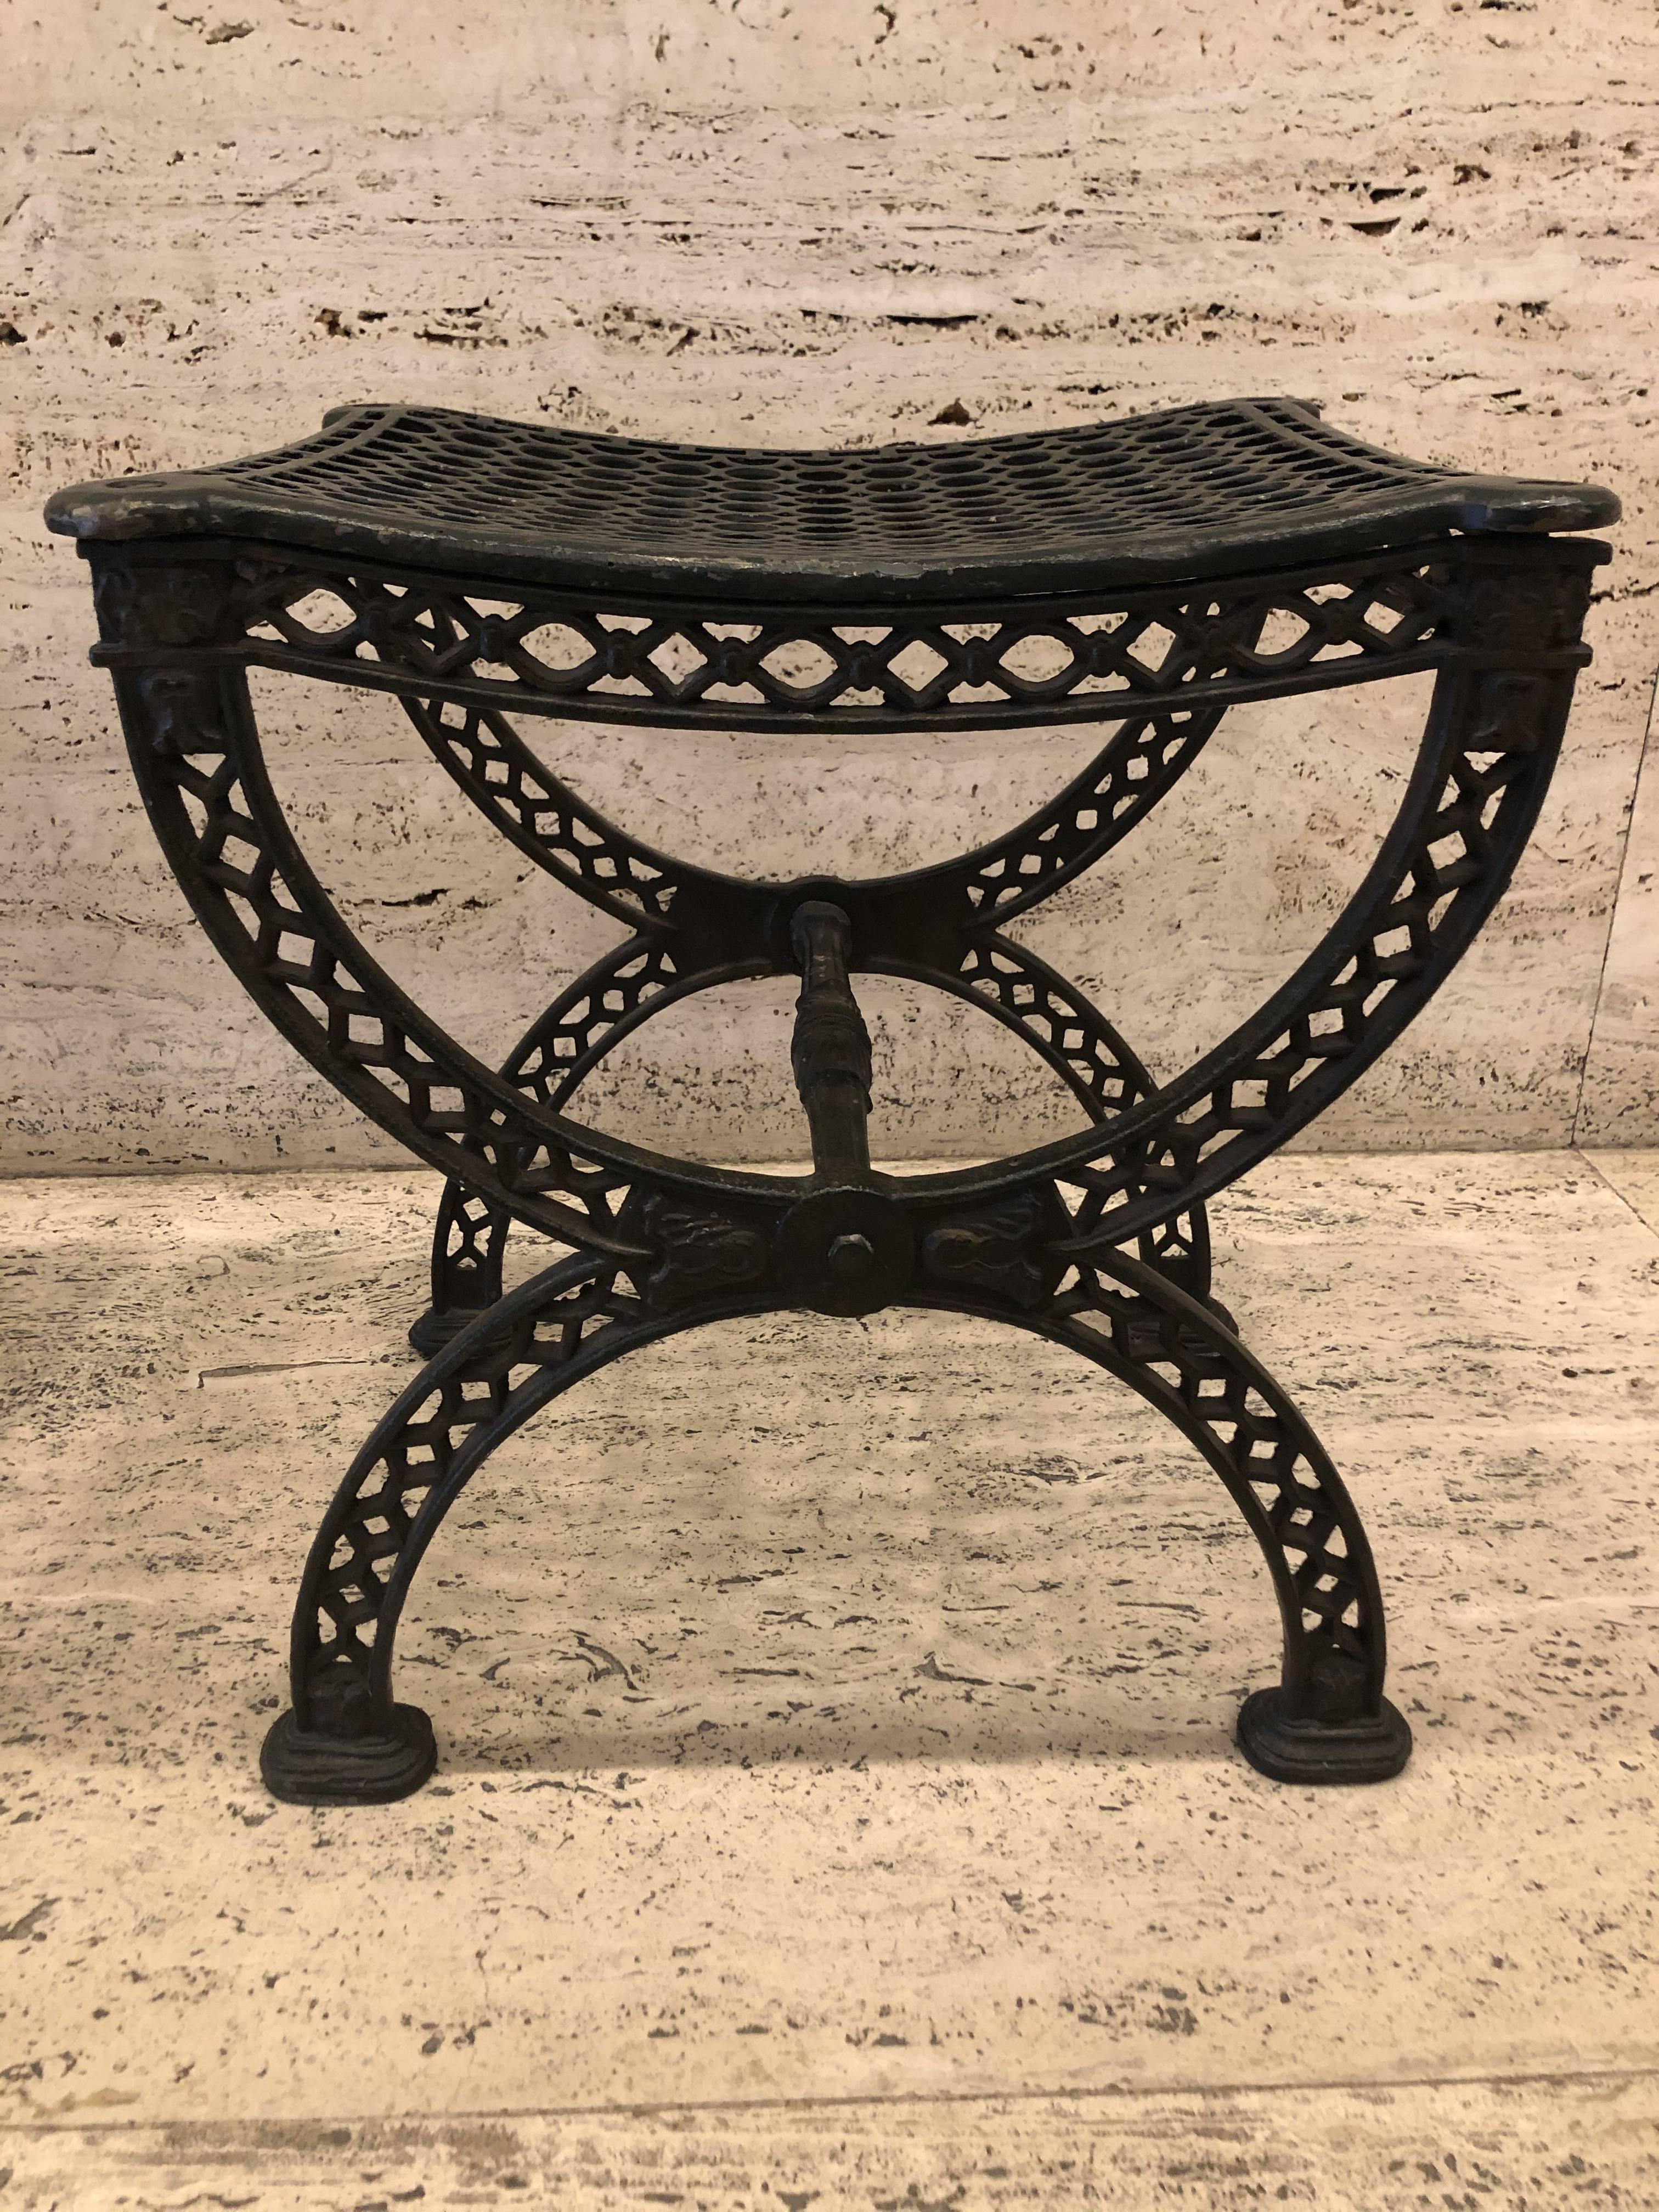 The real deal!! These are gorgeous, heavy, sturdy, and comfortable. French Filigree cast iron stools. In excellent condition.
Circa - 1940

They sat in her grandmothers garden during her childhood. After years in storage, the seller is ready for